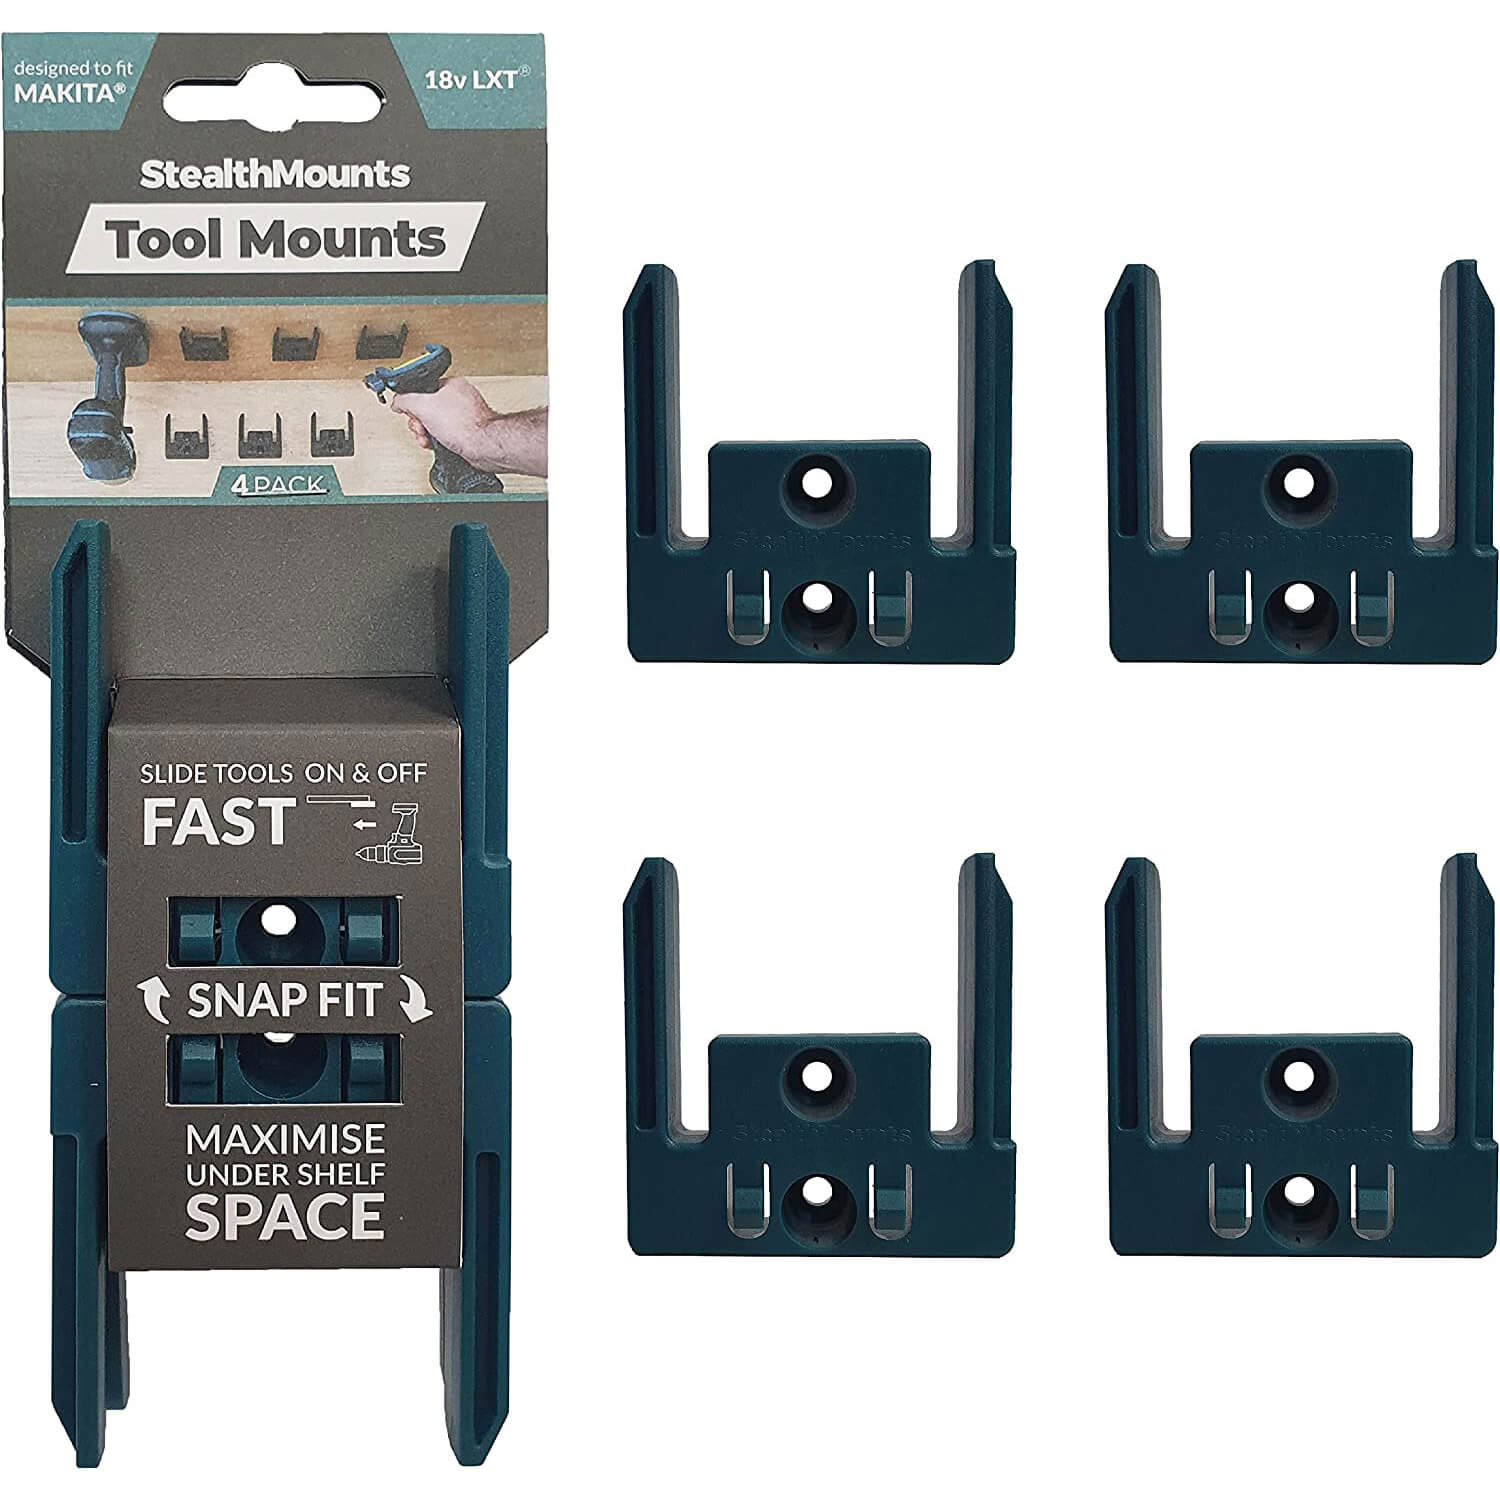 Image of Stealth Mounts 4 Pack Tool Mounts For Makita 18V LXT Tools Blue